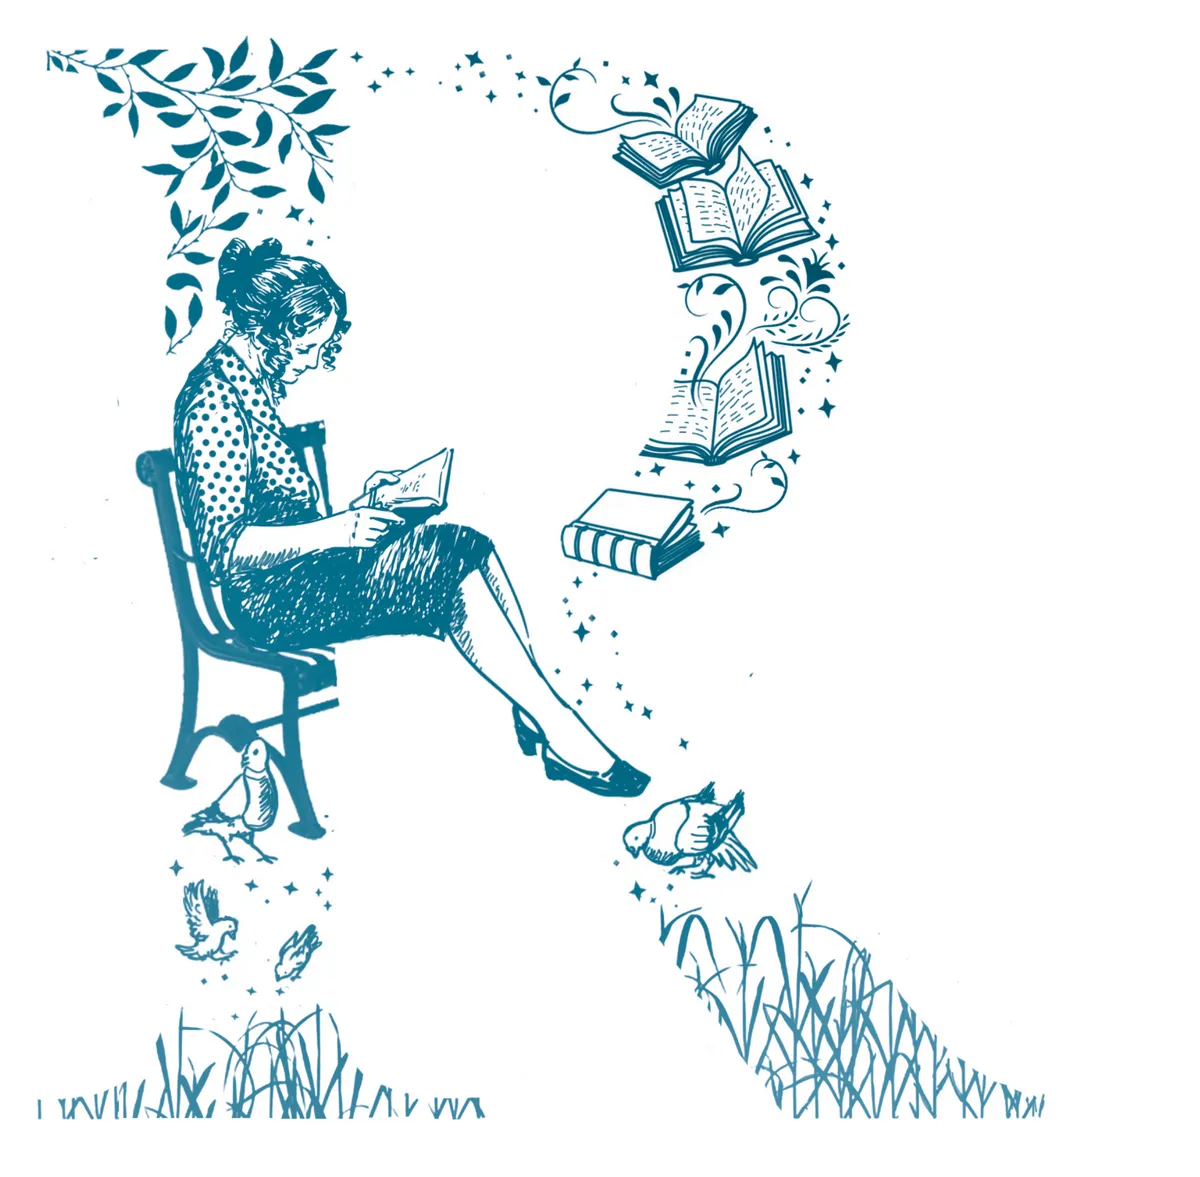 How reading is good for mindfulness